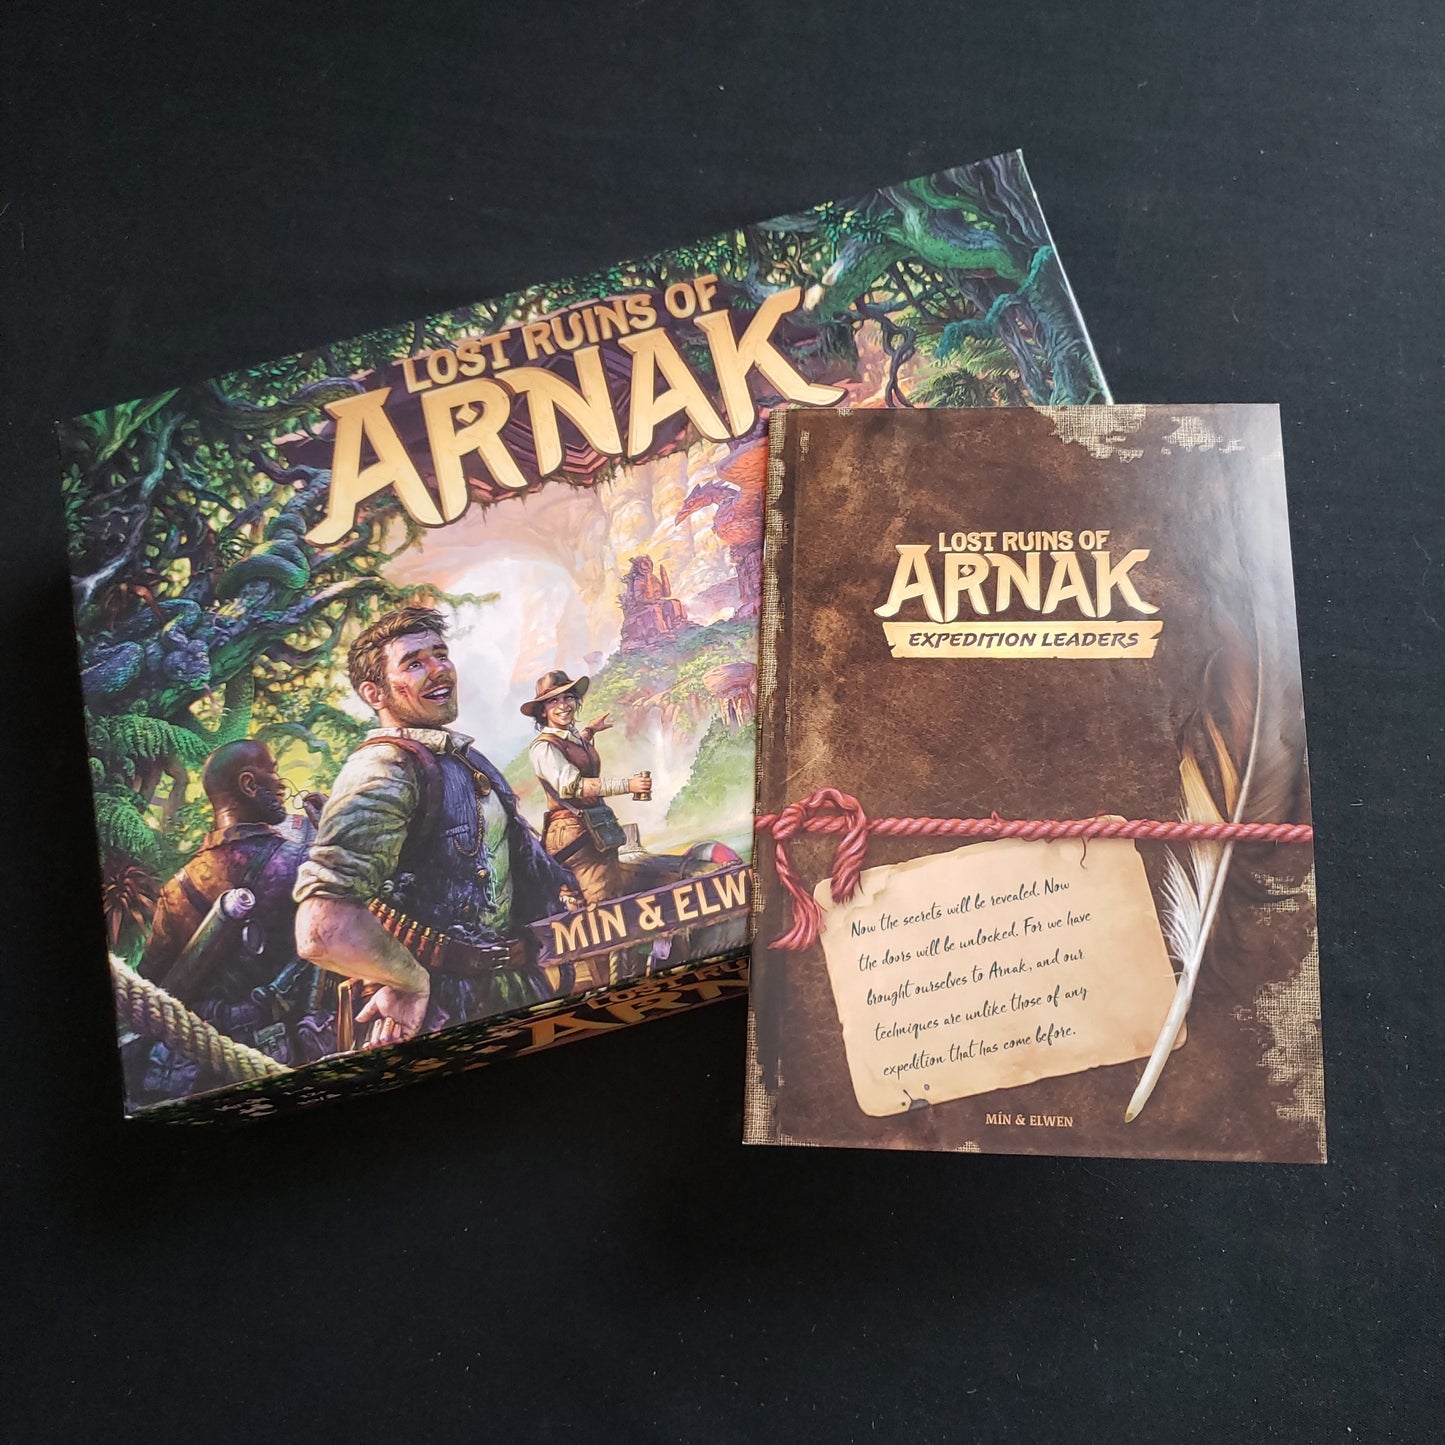 Image shows the front cover of the box of the Lost Ruins of Arnak board game, with the instructions for the Expedition Leaders expansion sitting on top of it